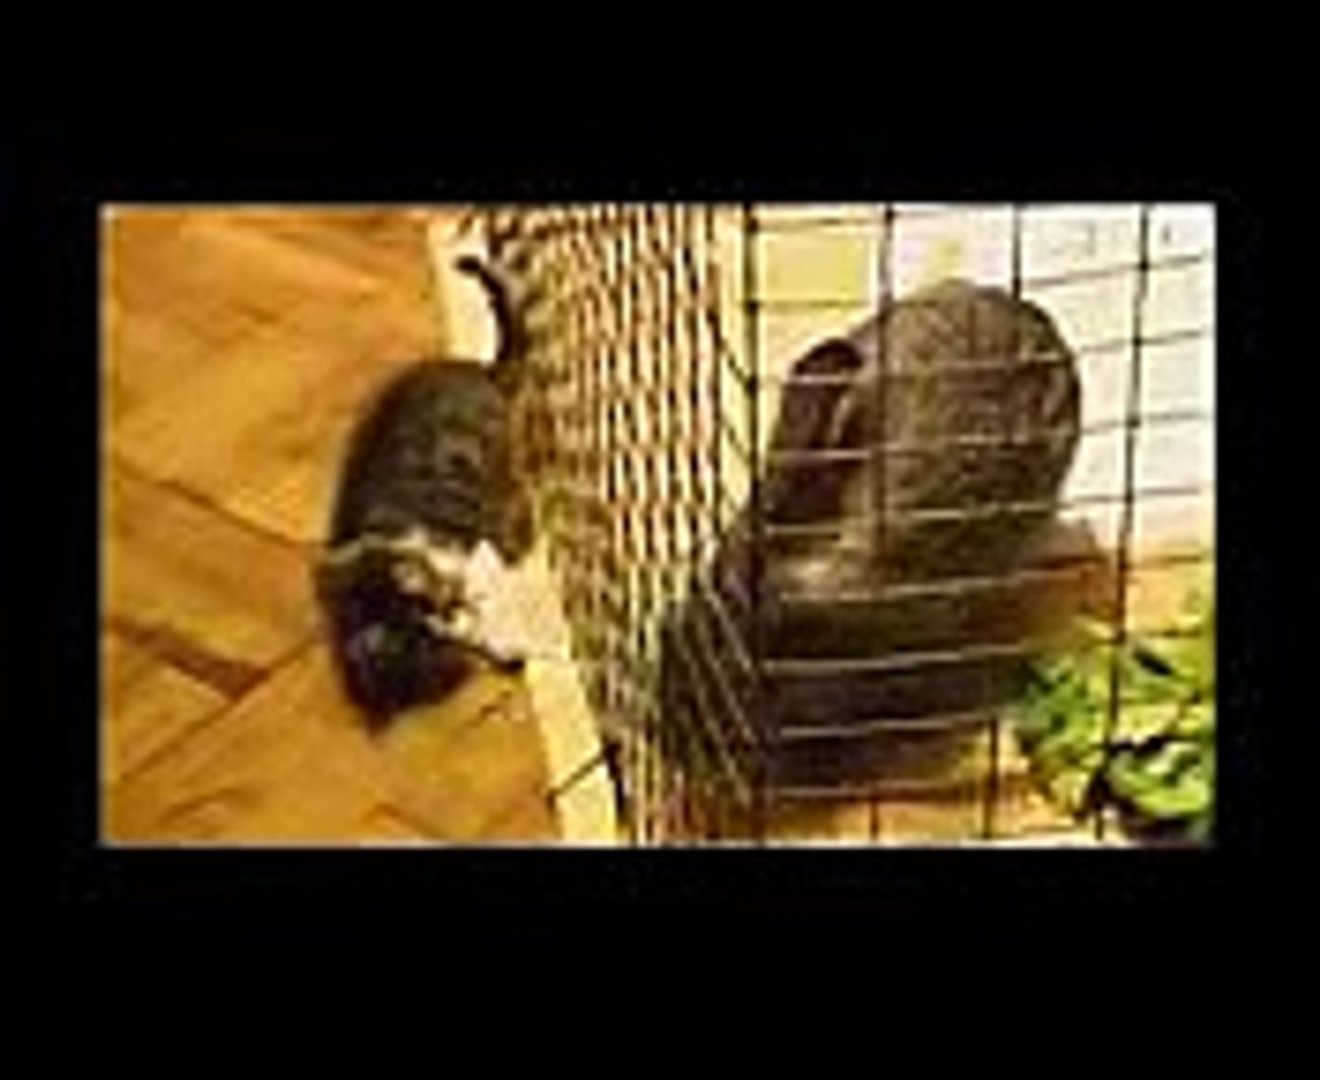 Cat (Animal), Funny Cats, Funny Videos, Funny Animal, funny videos 2014, Funny